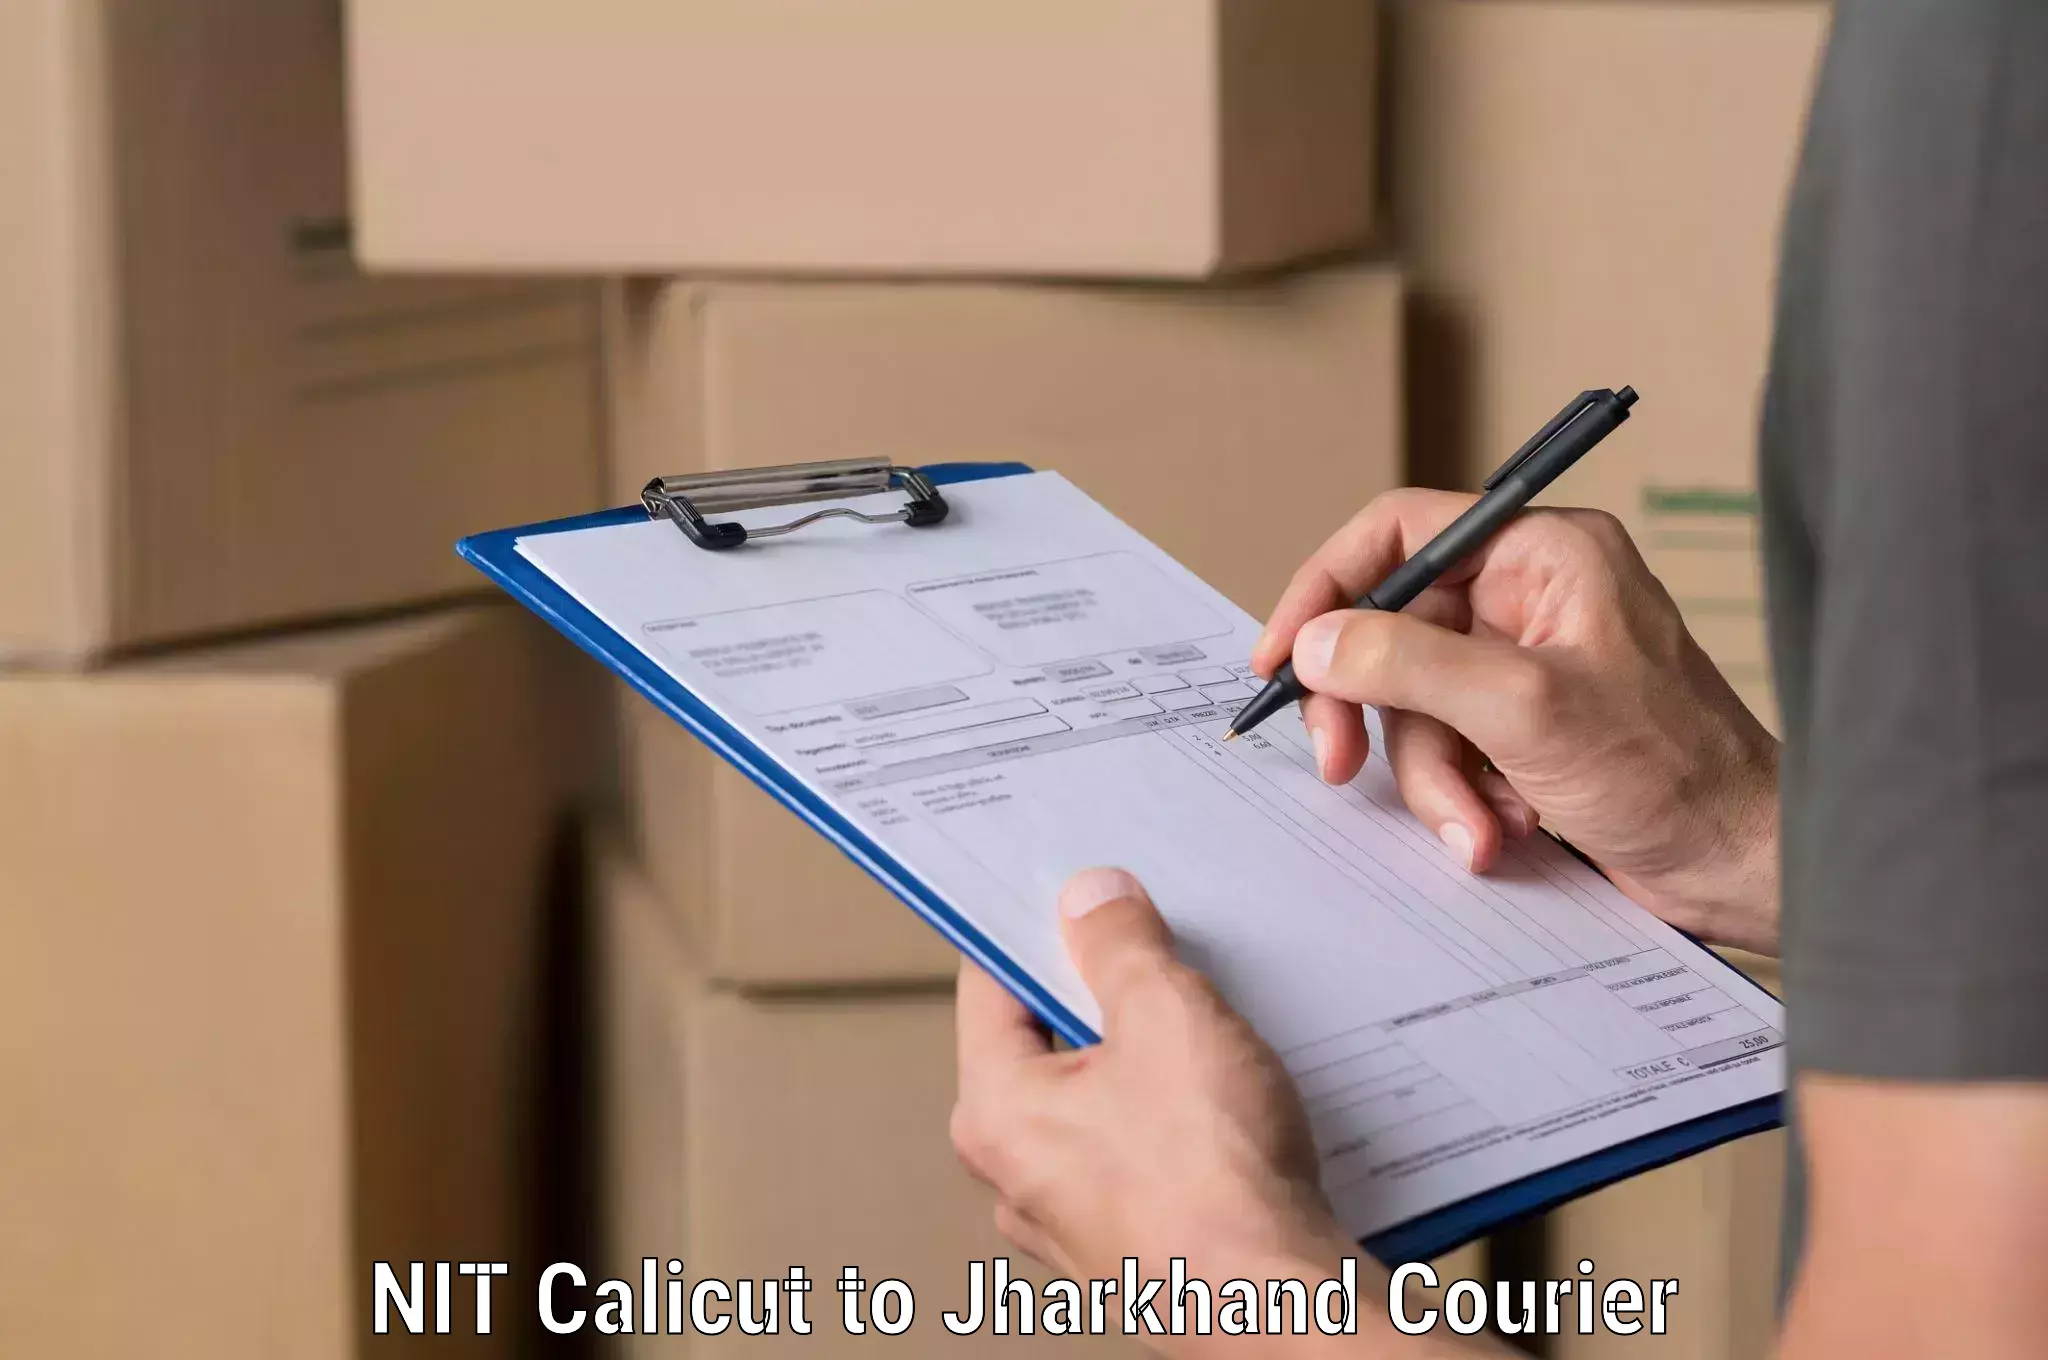 Package delivery network NIT Calicut to Jharkhand